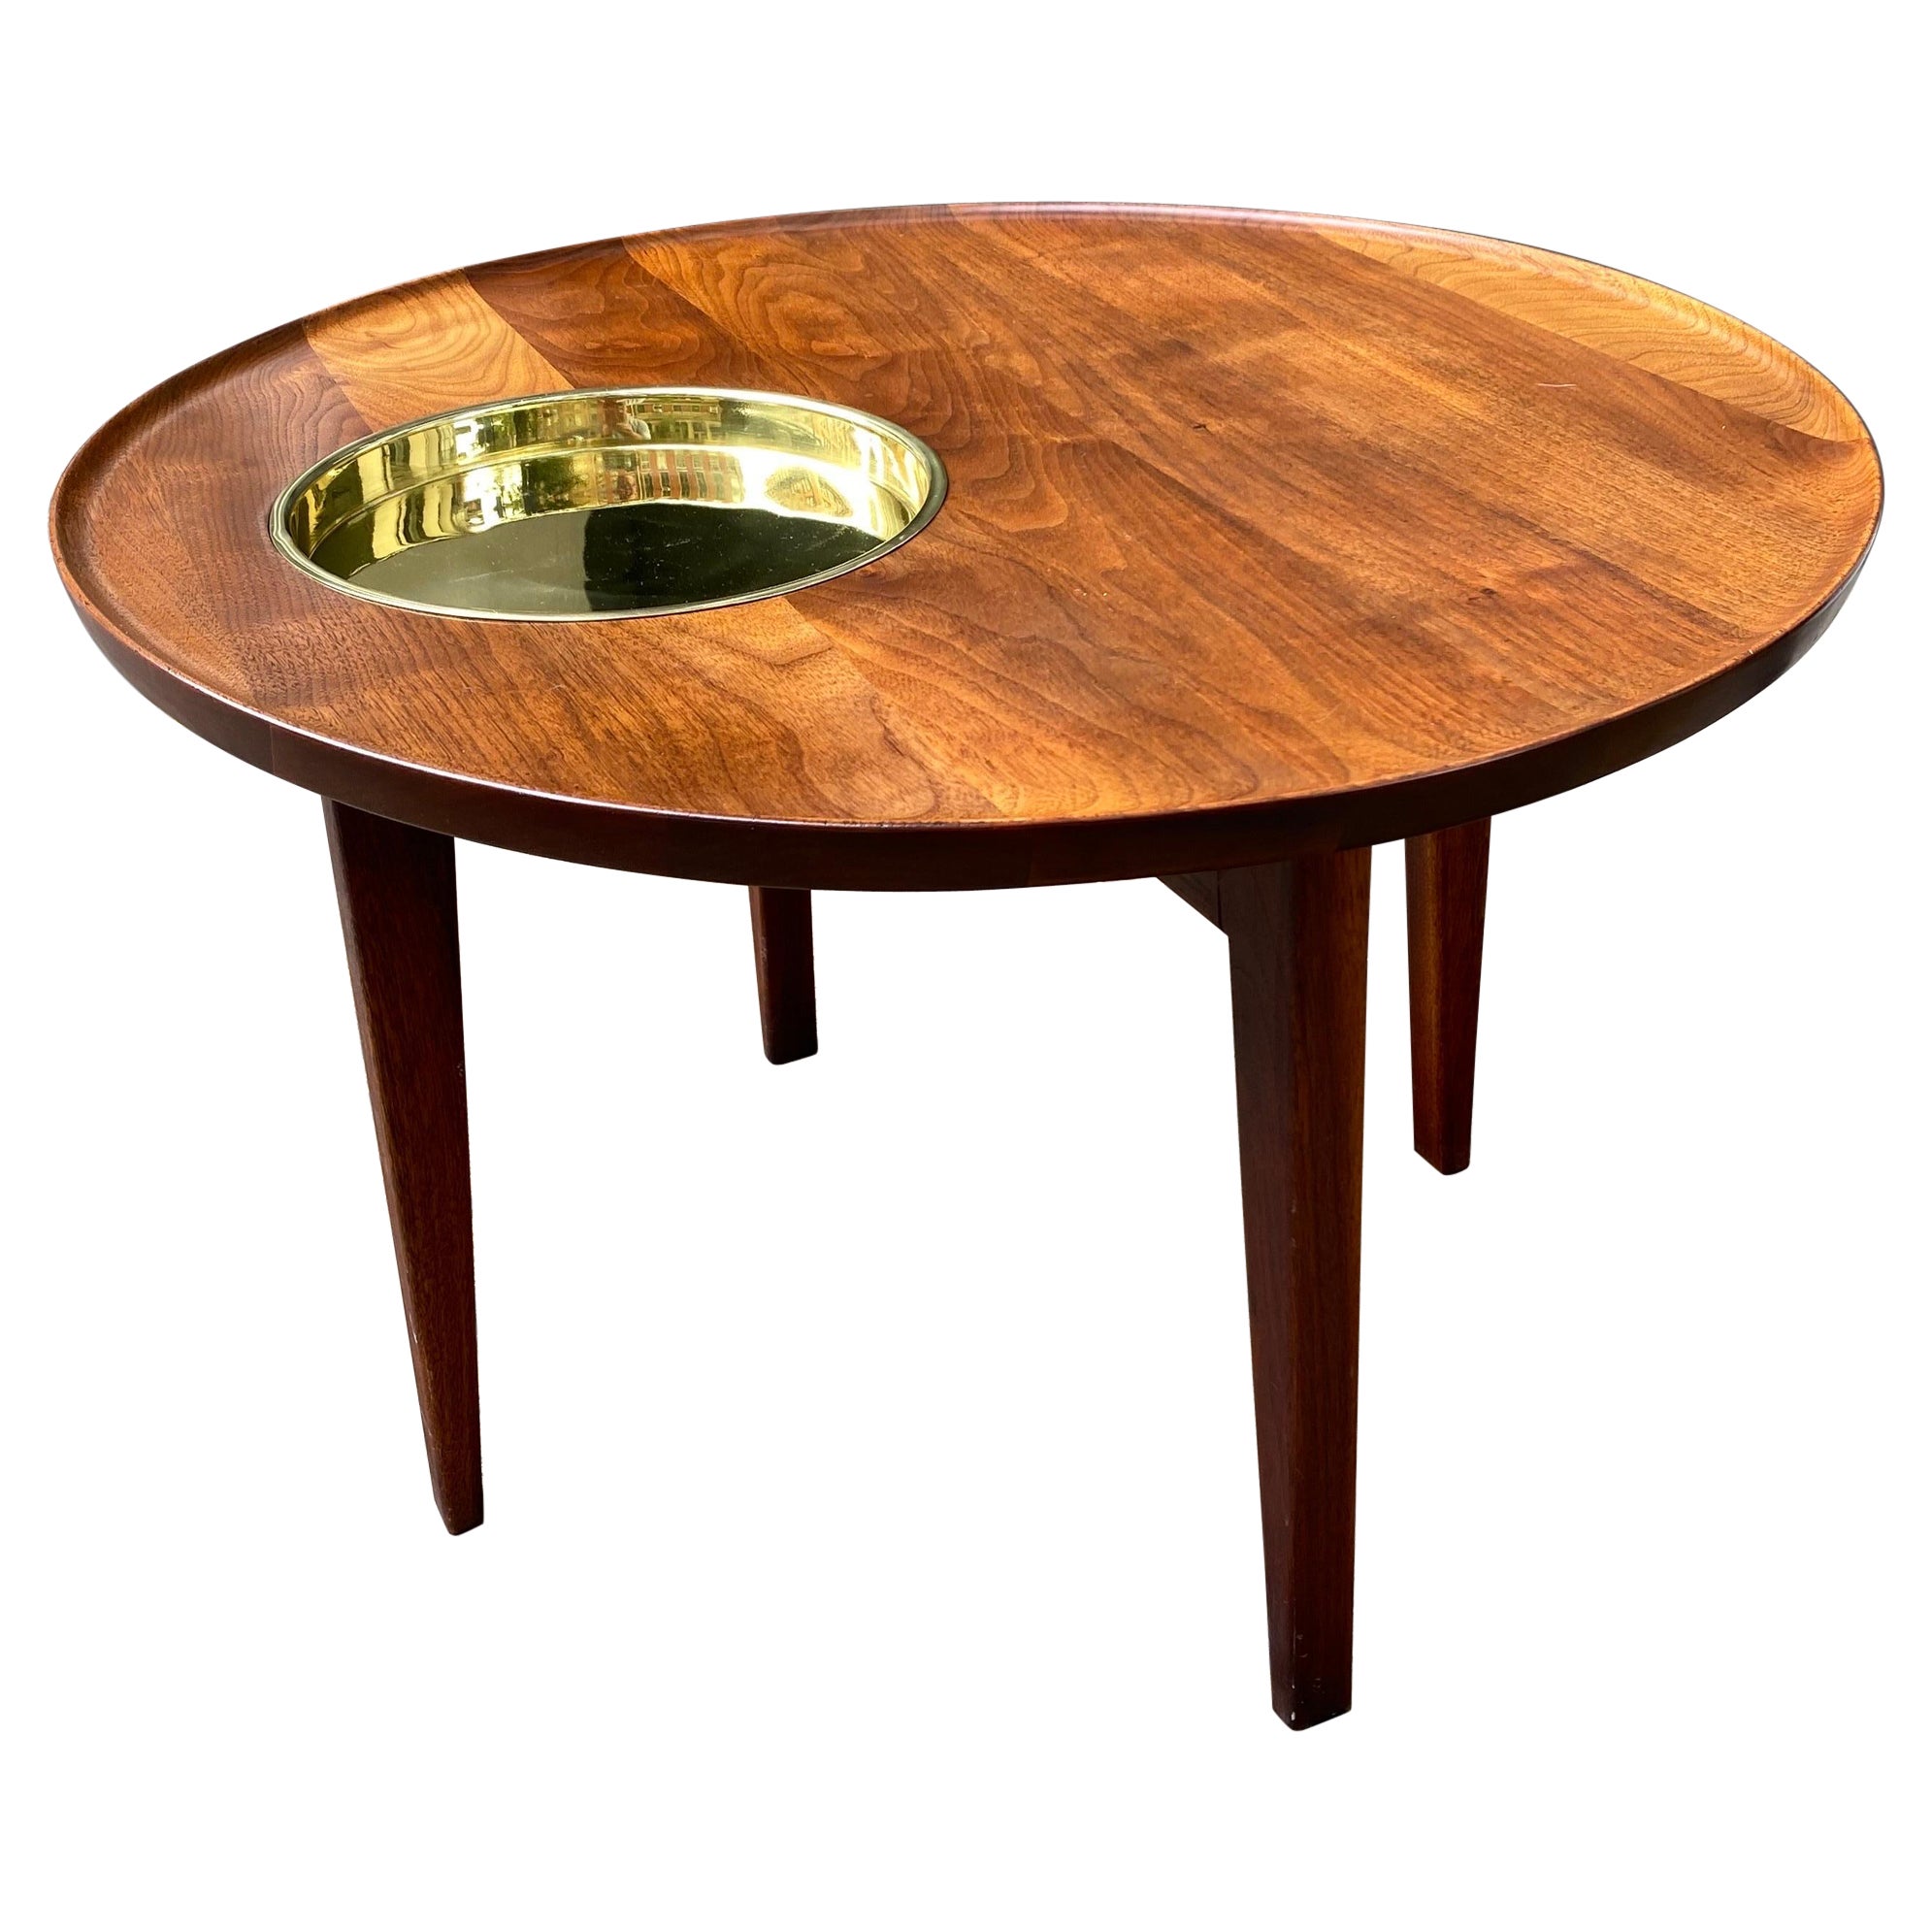 Jens Risom Solid Walnut and Brass Round Side Table